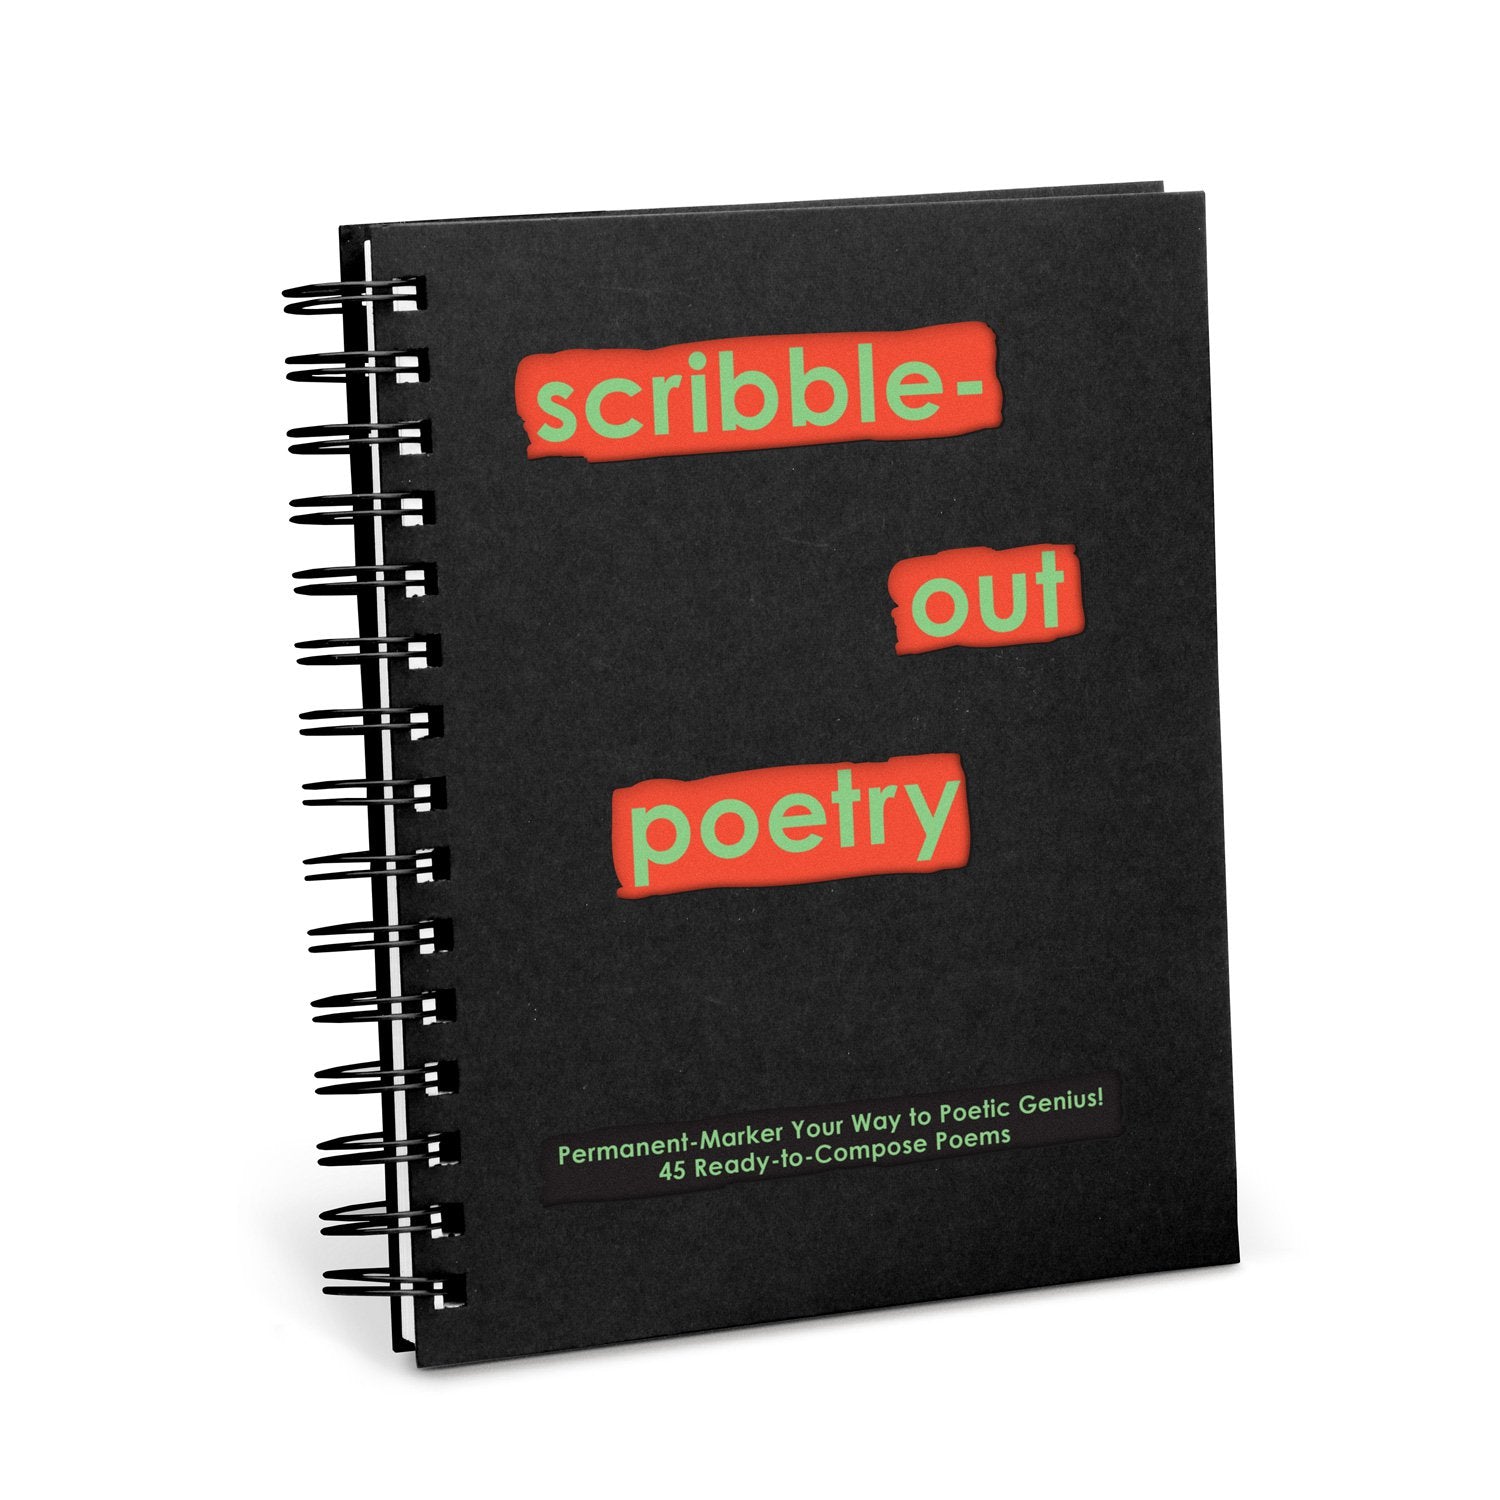 Scribble-Out Poetry: Permanent-Marker Your Way To Poetic Genius!